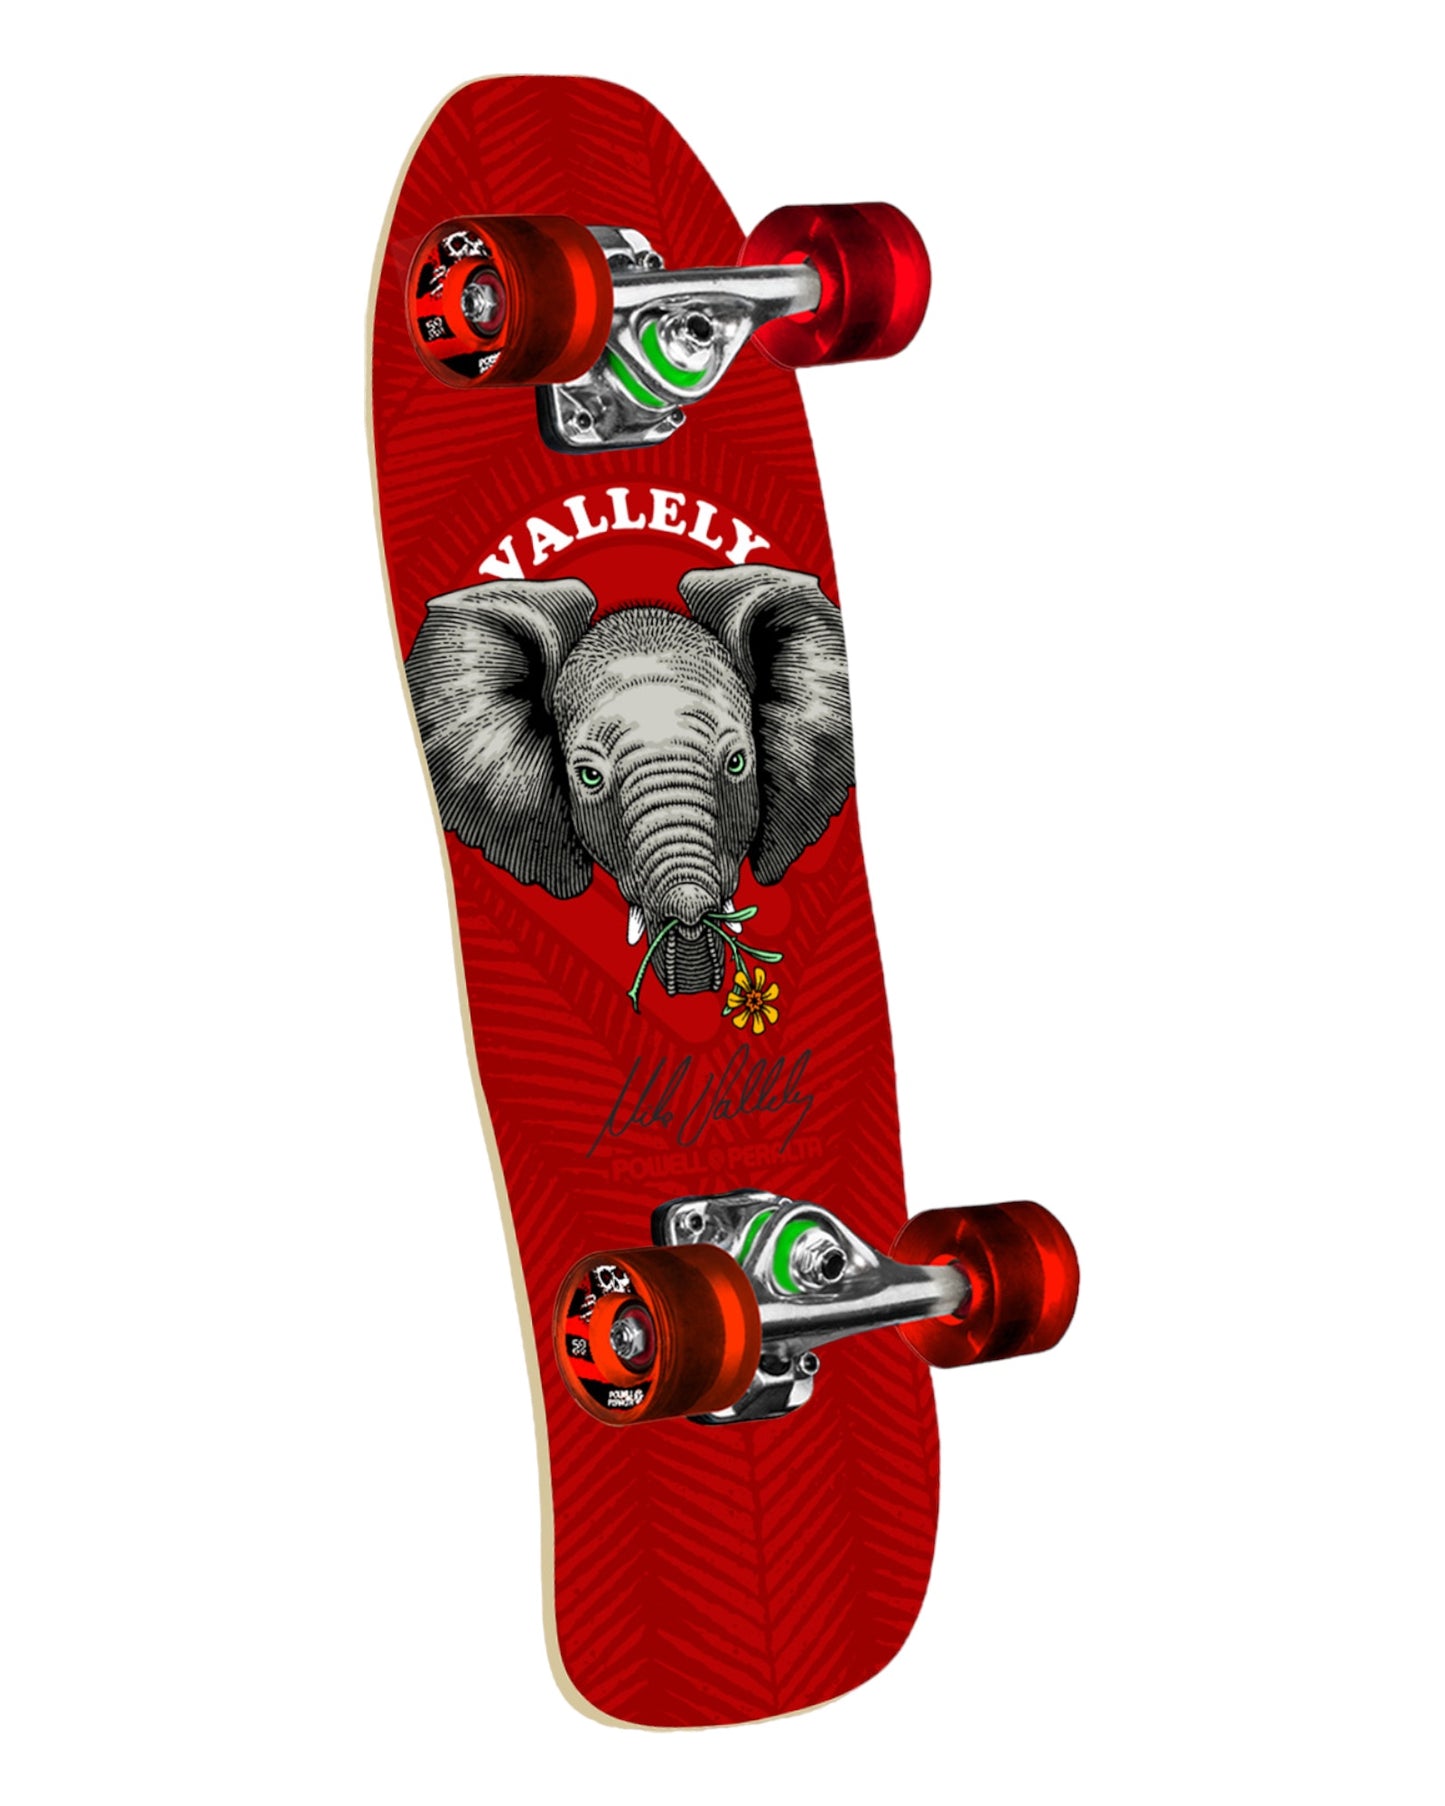 Powell Peralta Mike Vallely Baby Elephant Mini Complete Skateboard